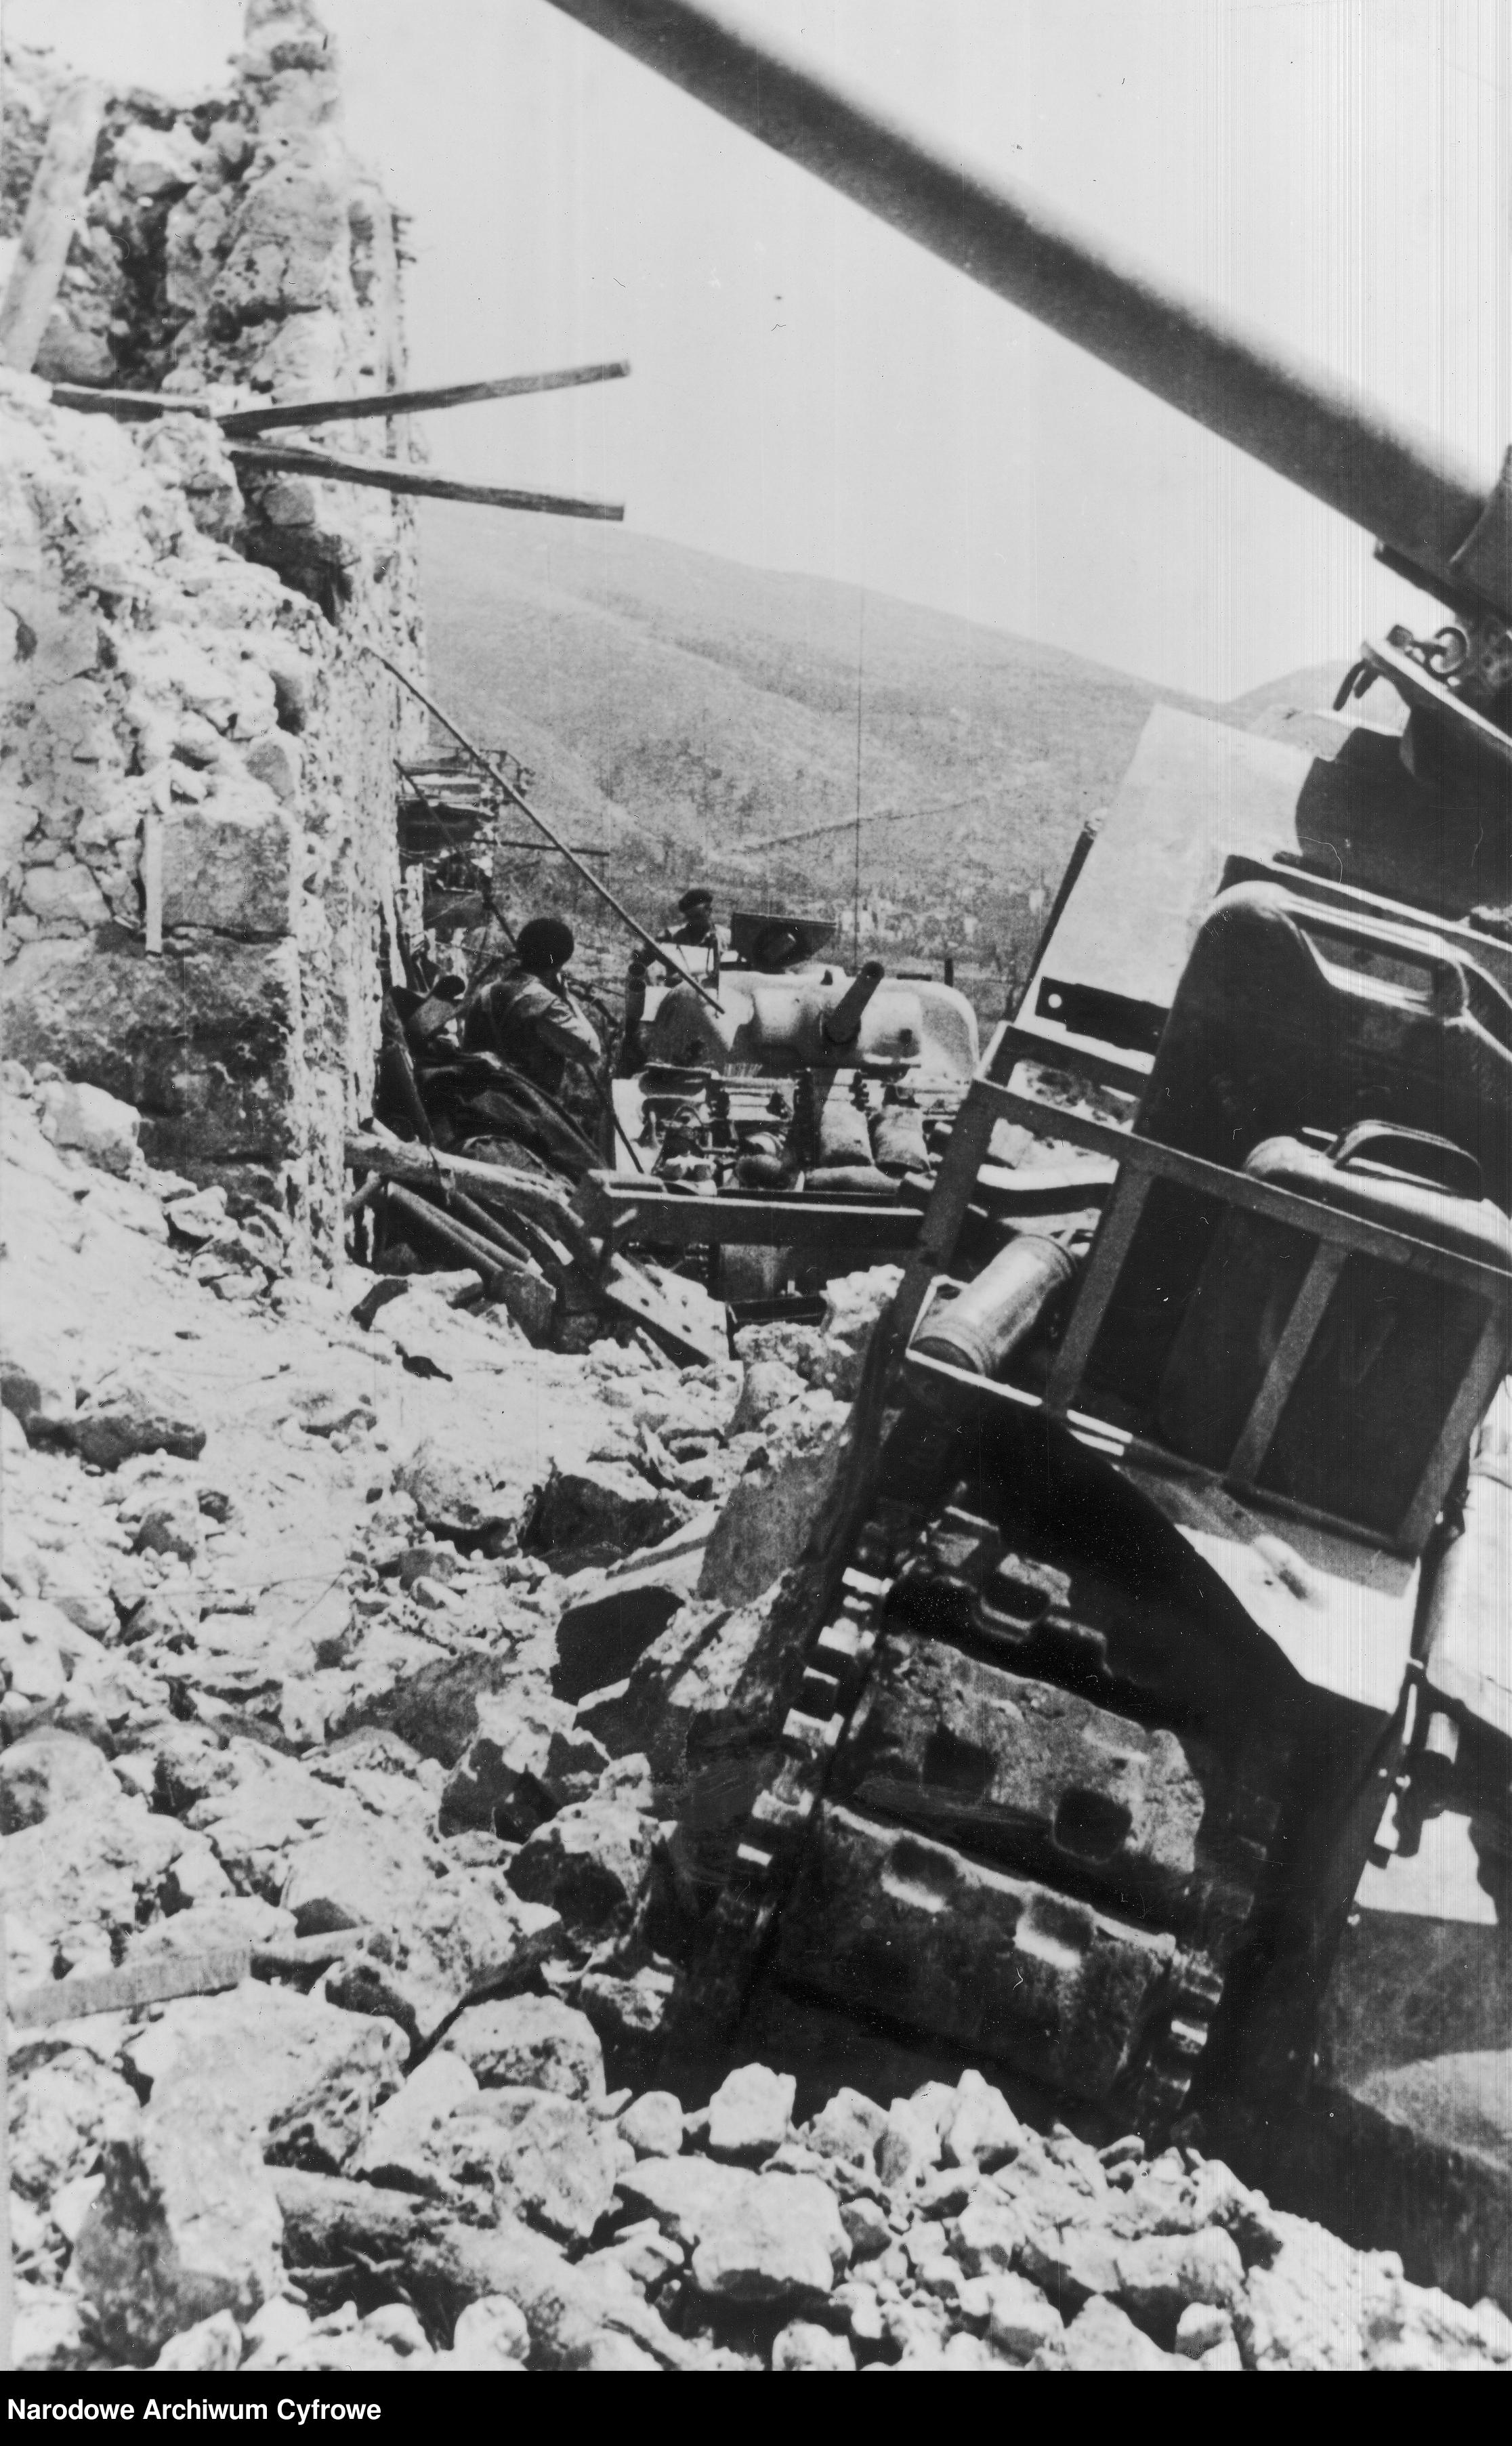 <p class='eng'>1944/05/25<br />Soldiers in the ruins. Visible tank M4 Sherman from the 6th Armored Regiment "Children of Lviv".<br />NAC 3/24/0/-/458/6</p>